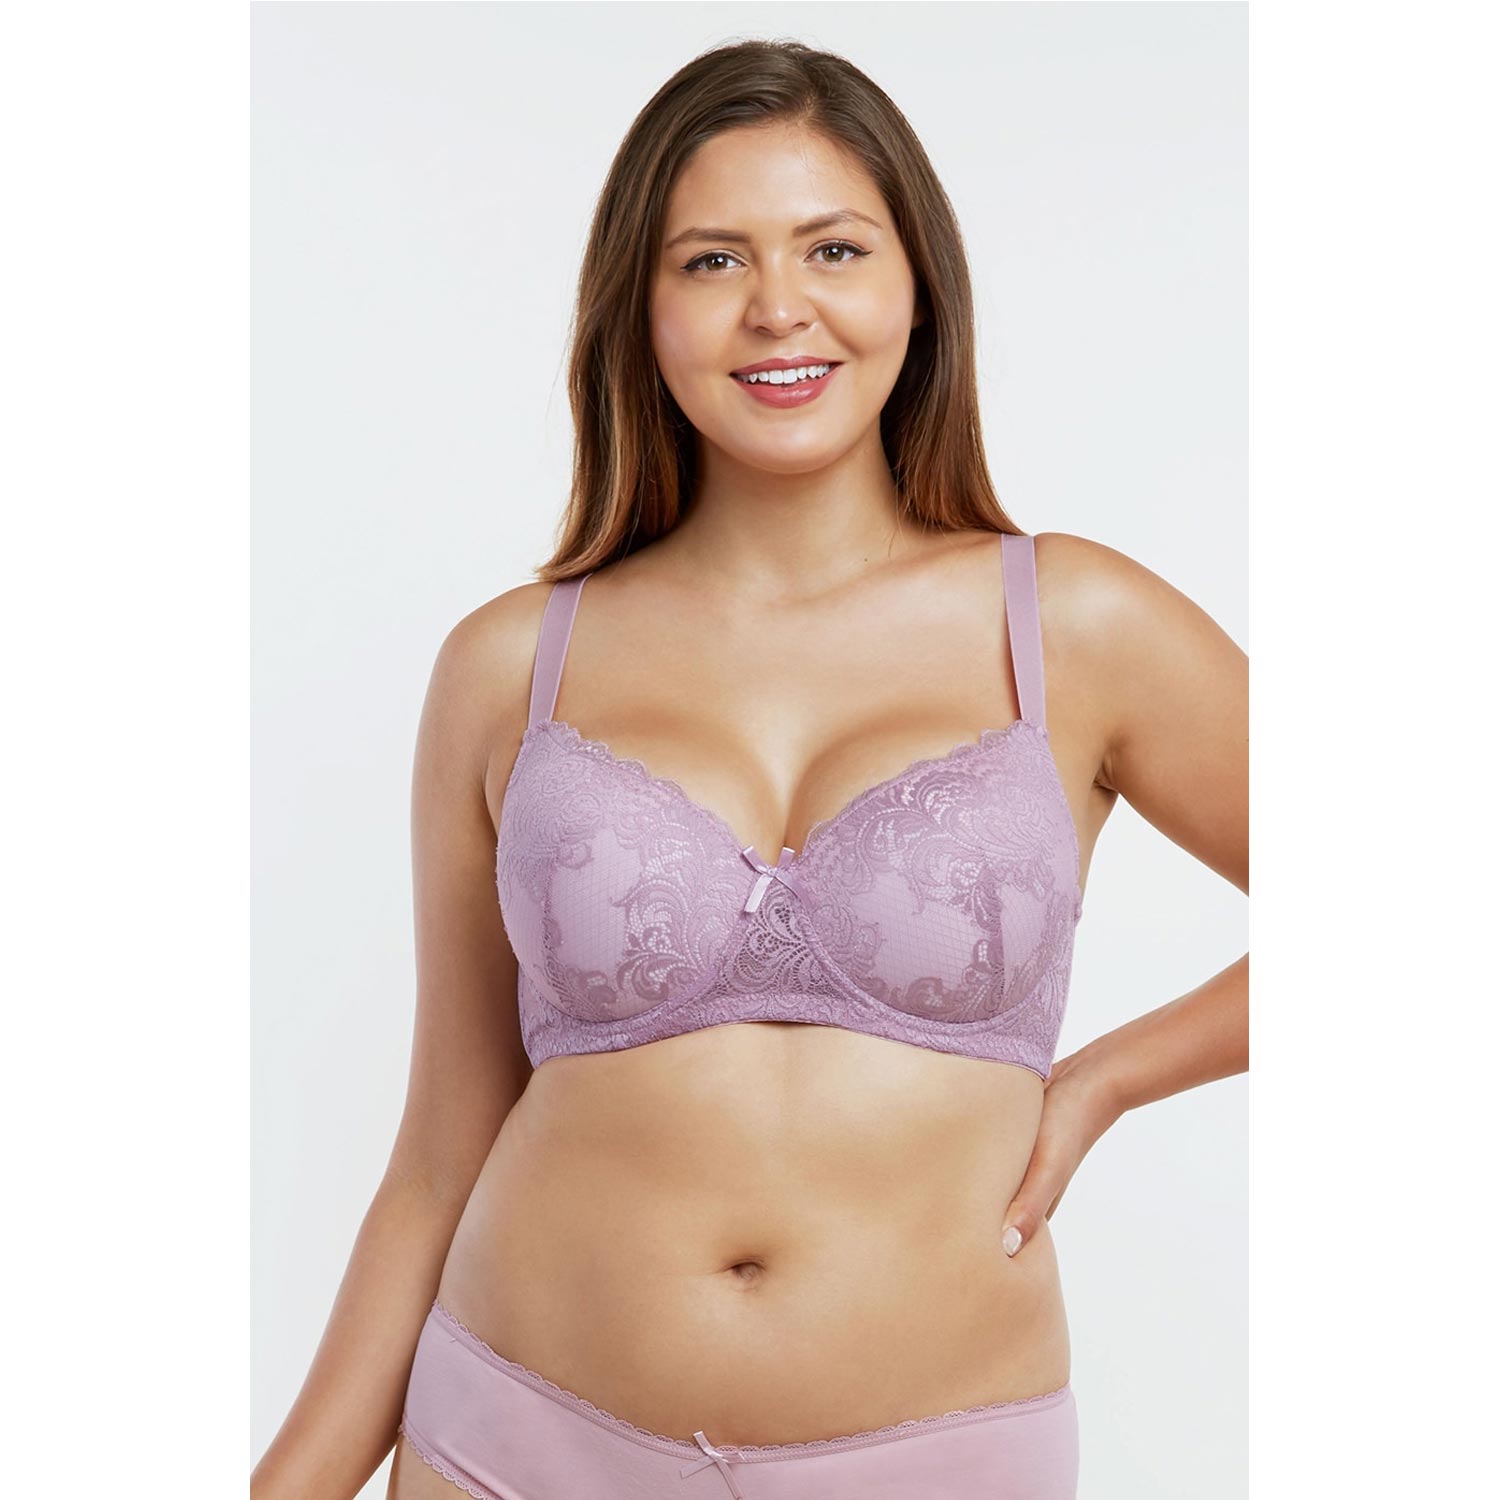 Ladies Full Cup Lace DD Cup Bra - 6 Pack